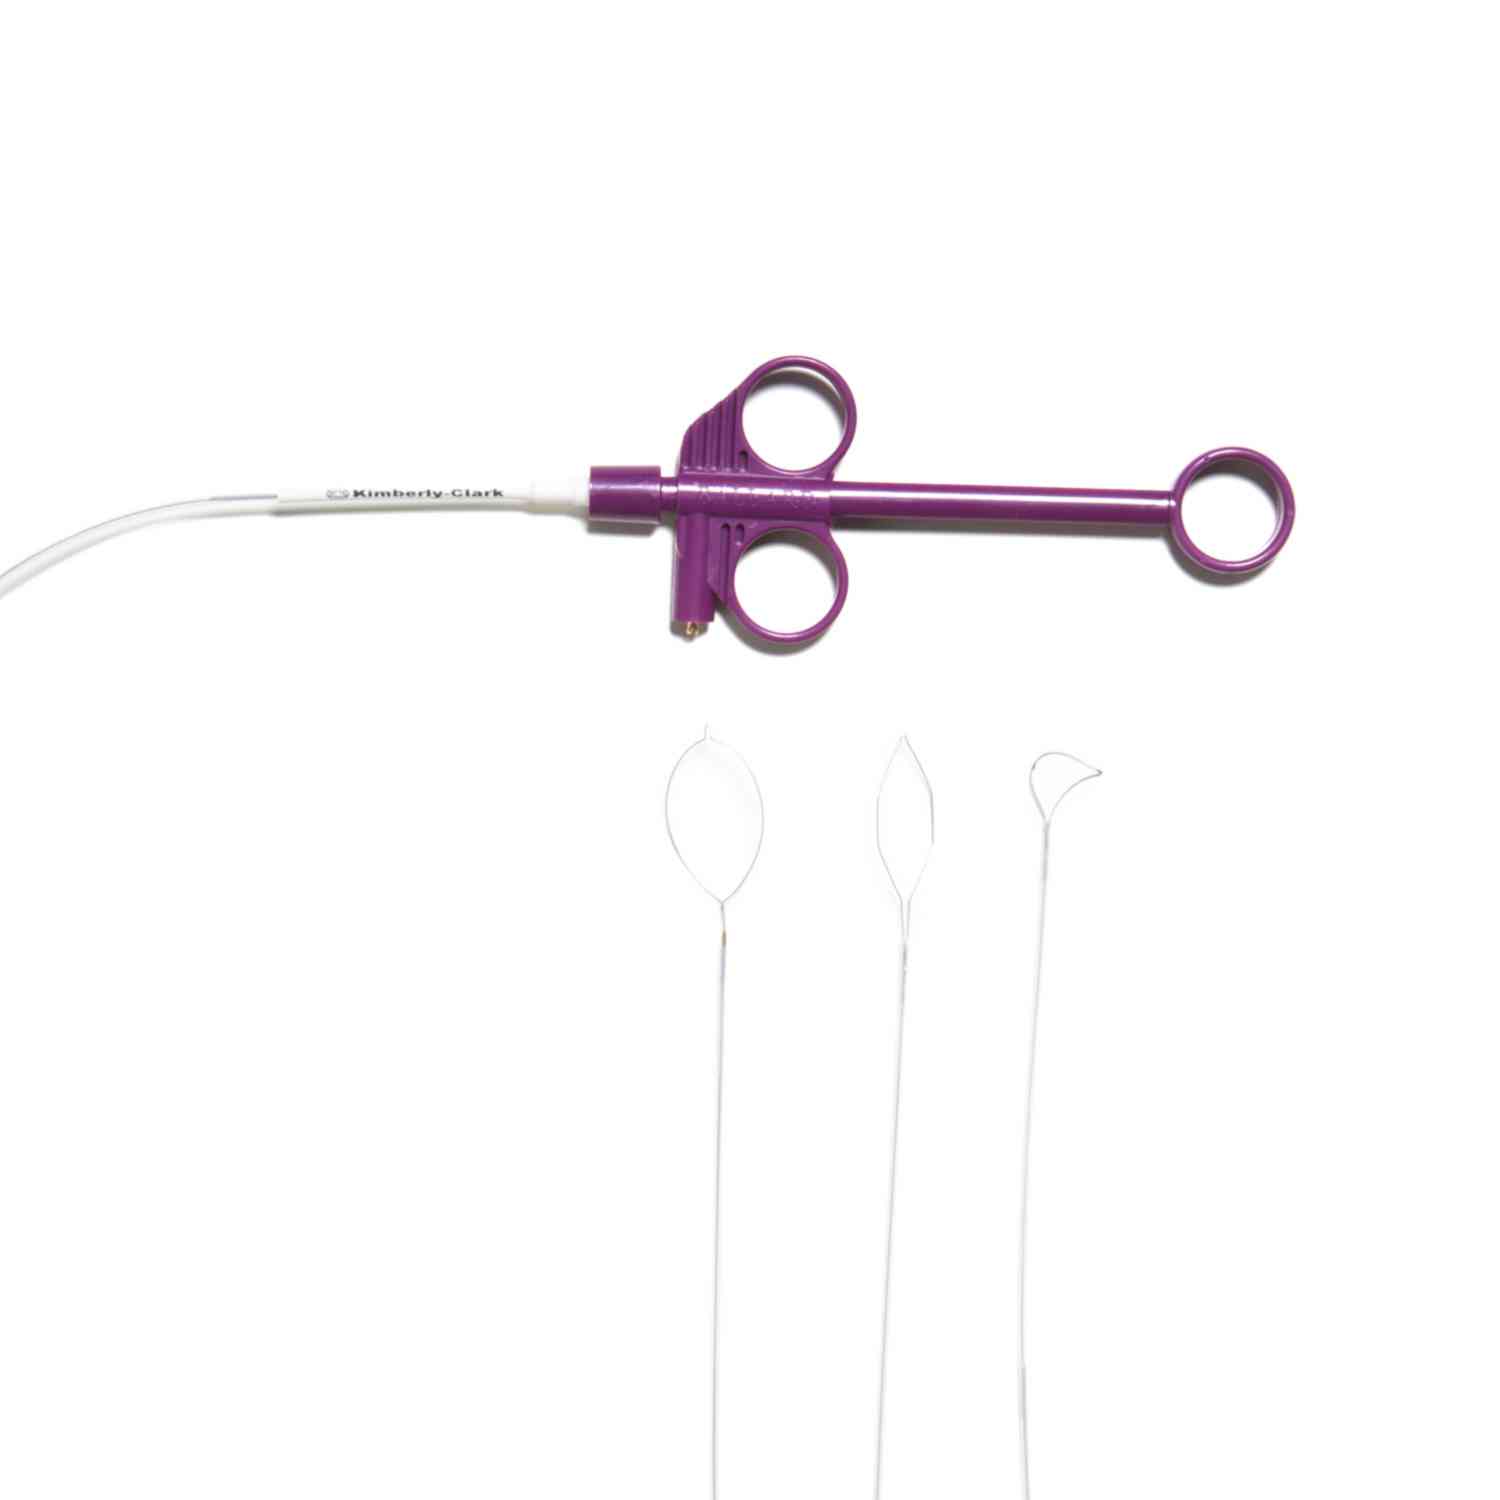 Polypectomy Snares - Crescent Loop / Large / 2.3mm 240cm 10 /CS by